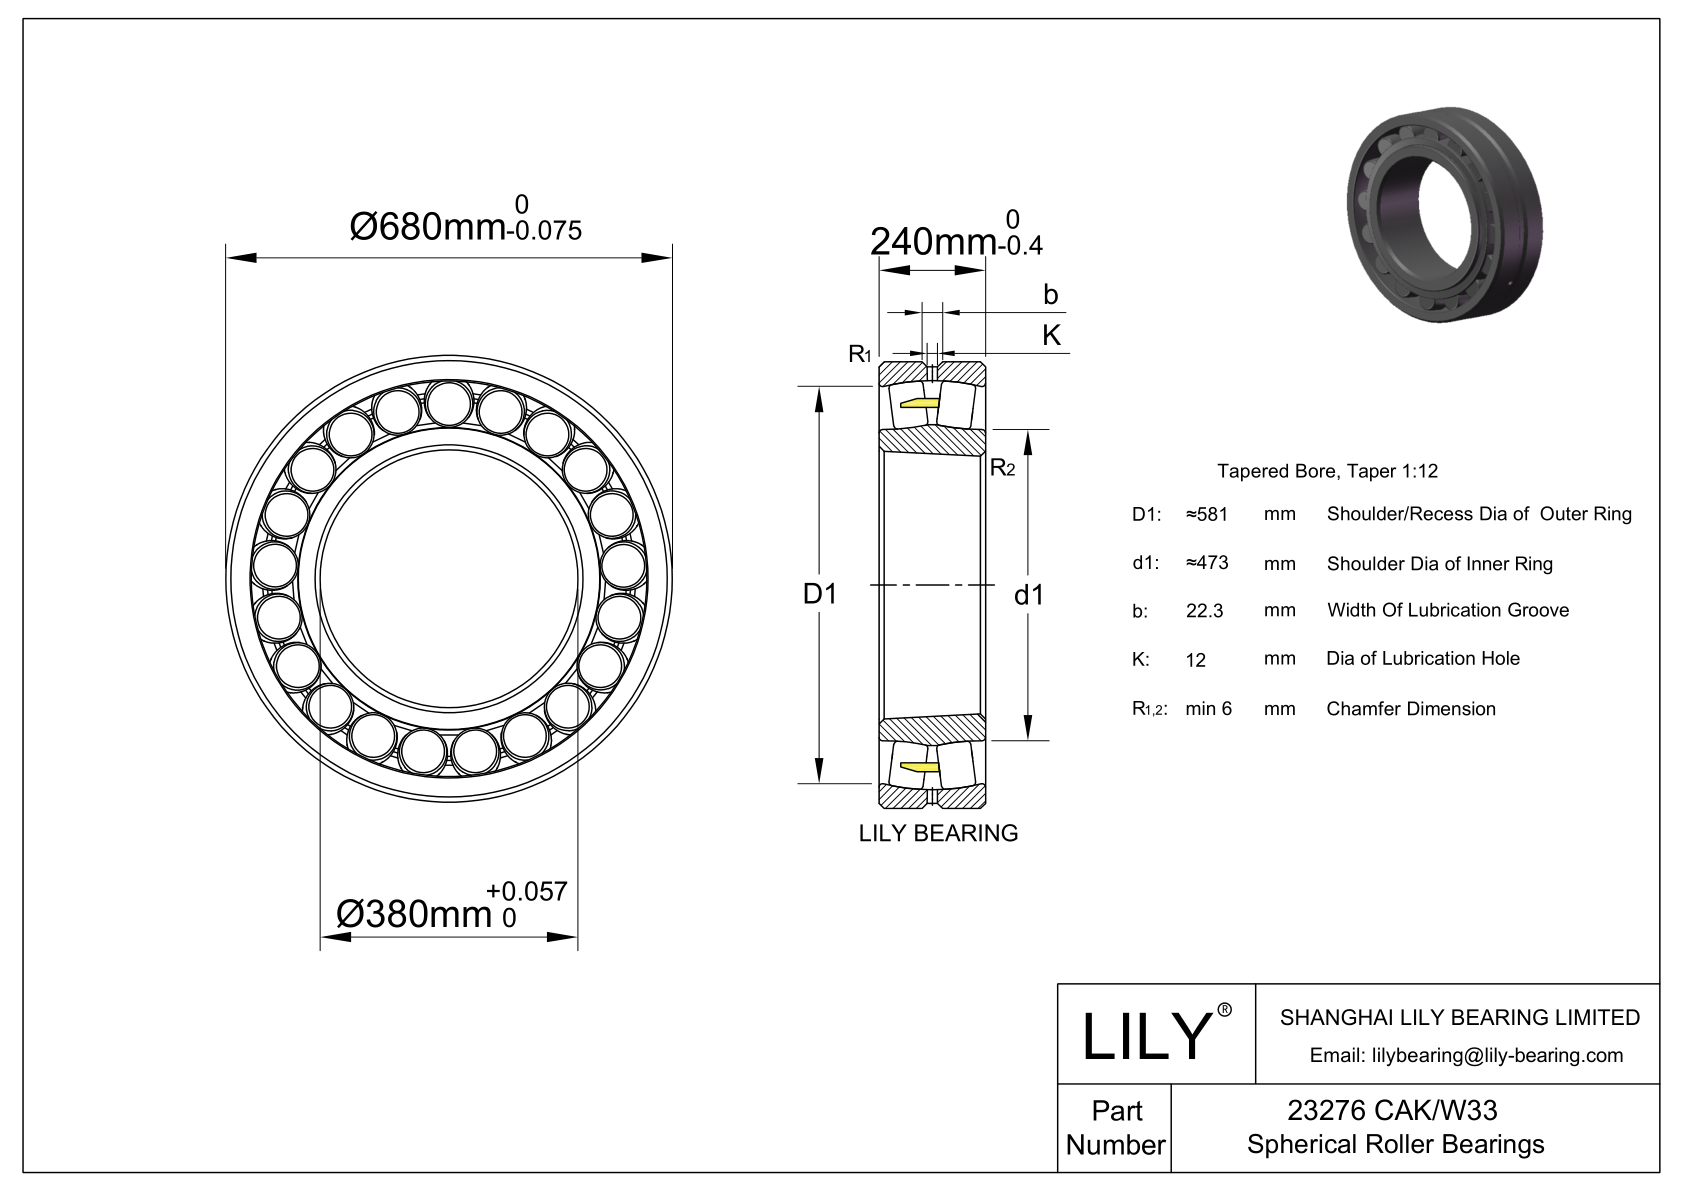 23276 CAK/W33 Double Row Spherical Roller Bearing cad drawing